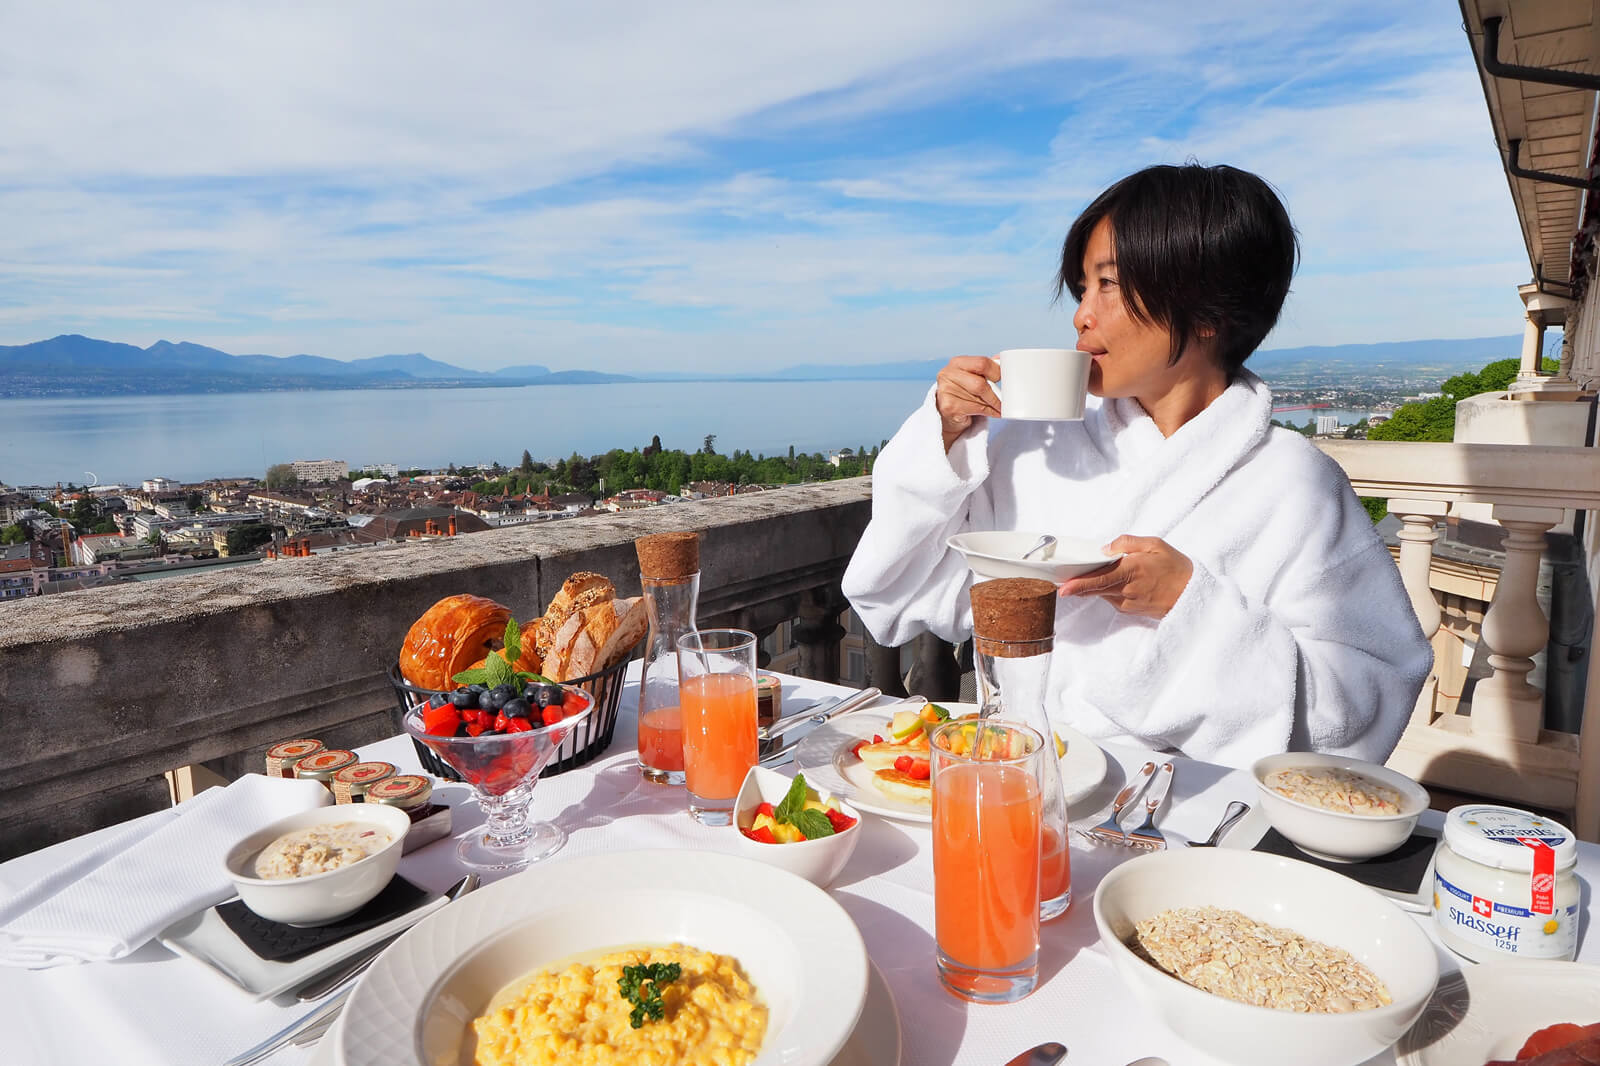 Breakfast with a view at the Lausanne Palace